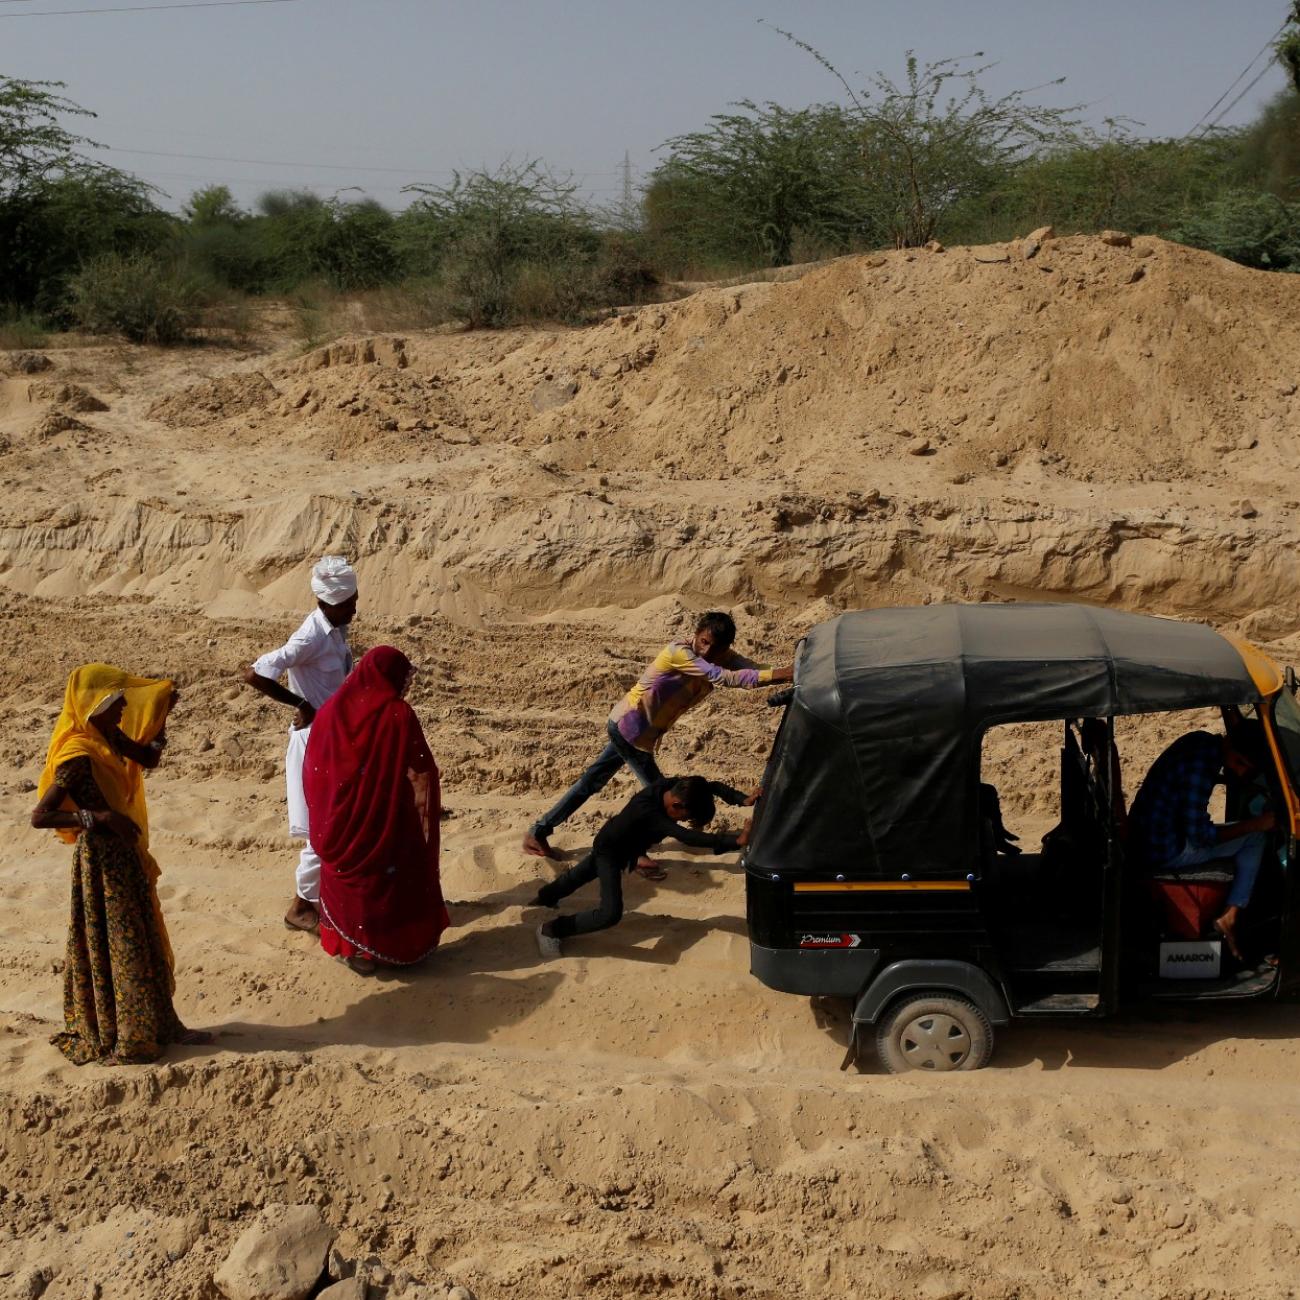 Bhawri Devi watches as her husband and son push an auto-rickshaw which got stuck in the sand on the way home from receiving cancer treatment, in a village in Jalore, India, on April 7, 2018. 